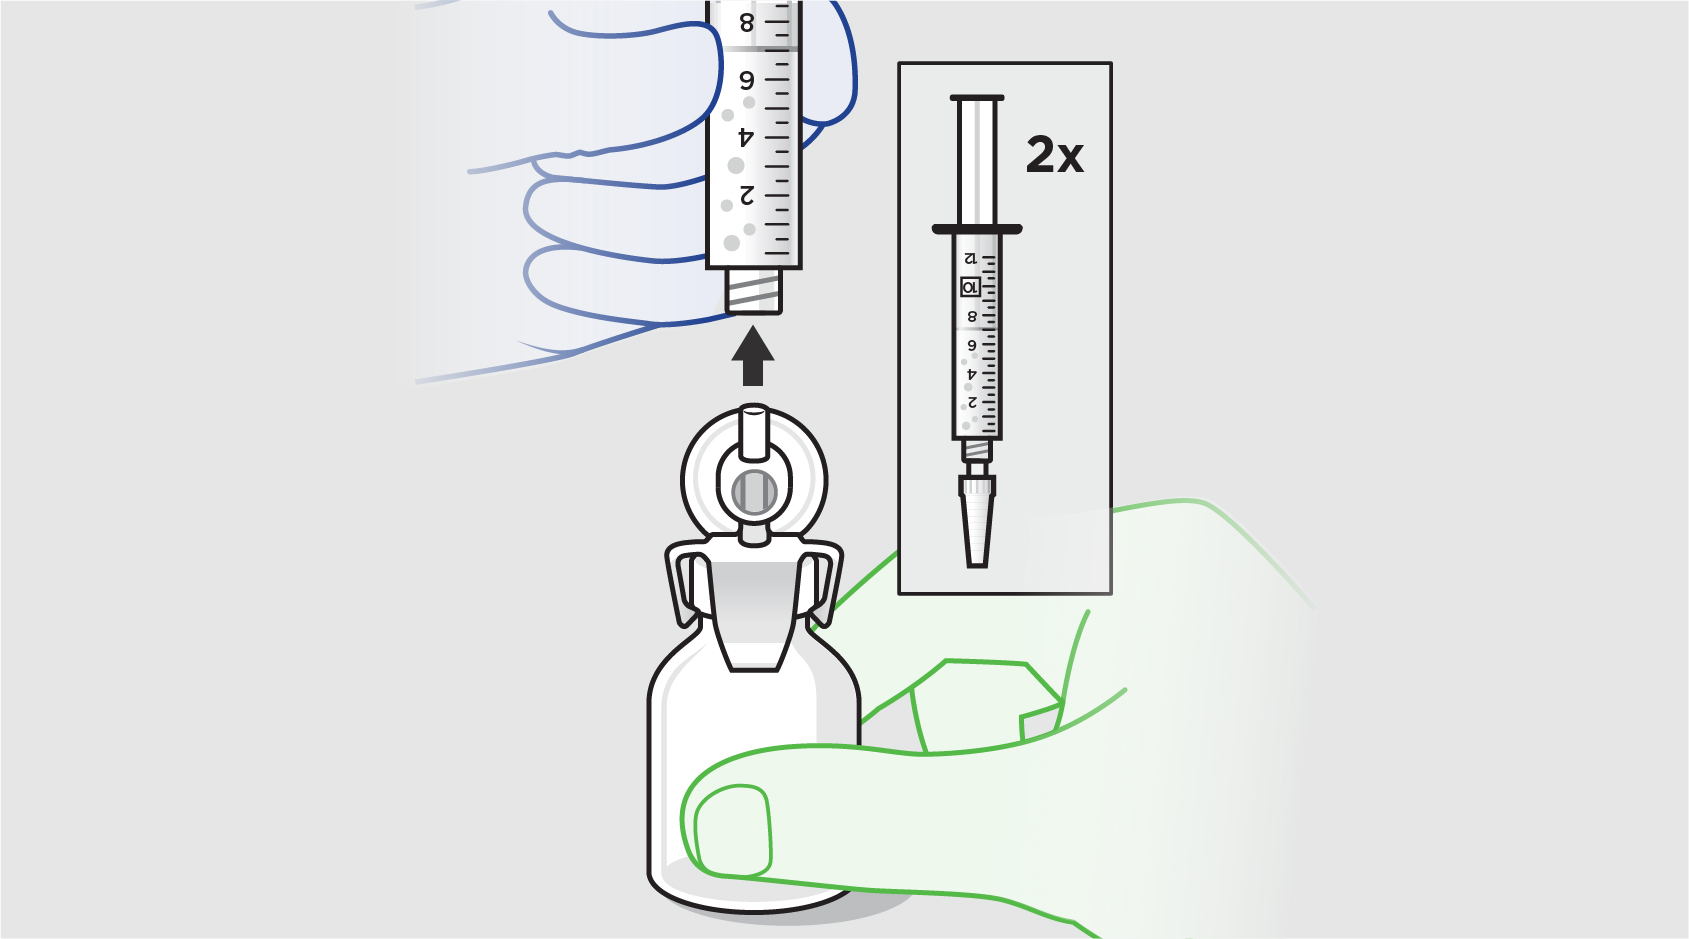 Blue “sterile” hand attaching second syringe to vented vial spike held by green “nonsterile” hand.